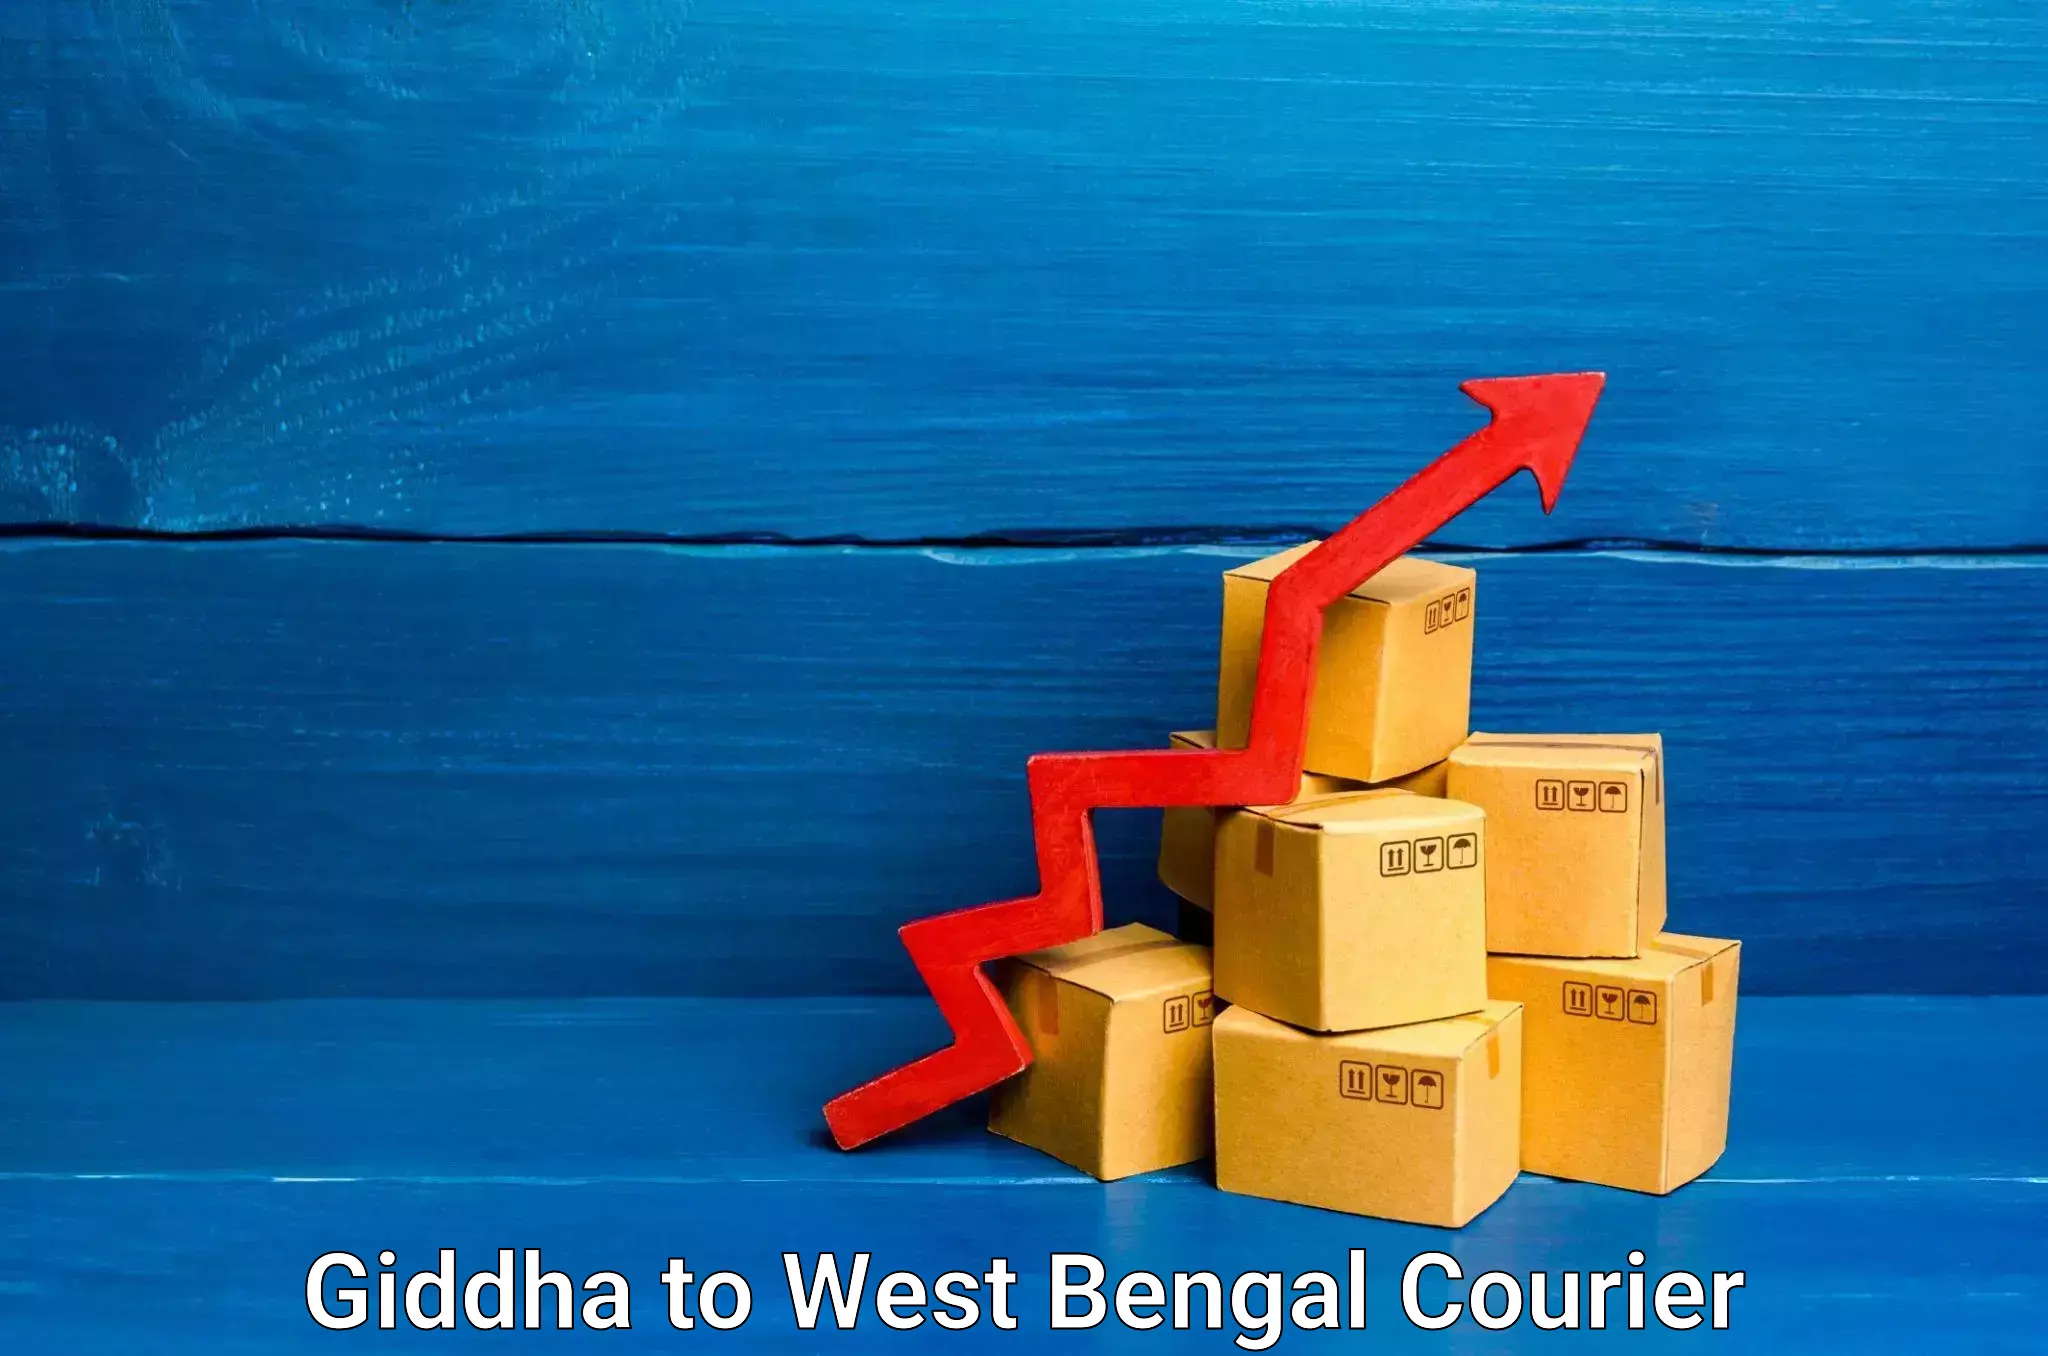 Furniture moving plans Giddha to West Bengal